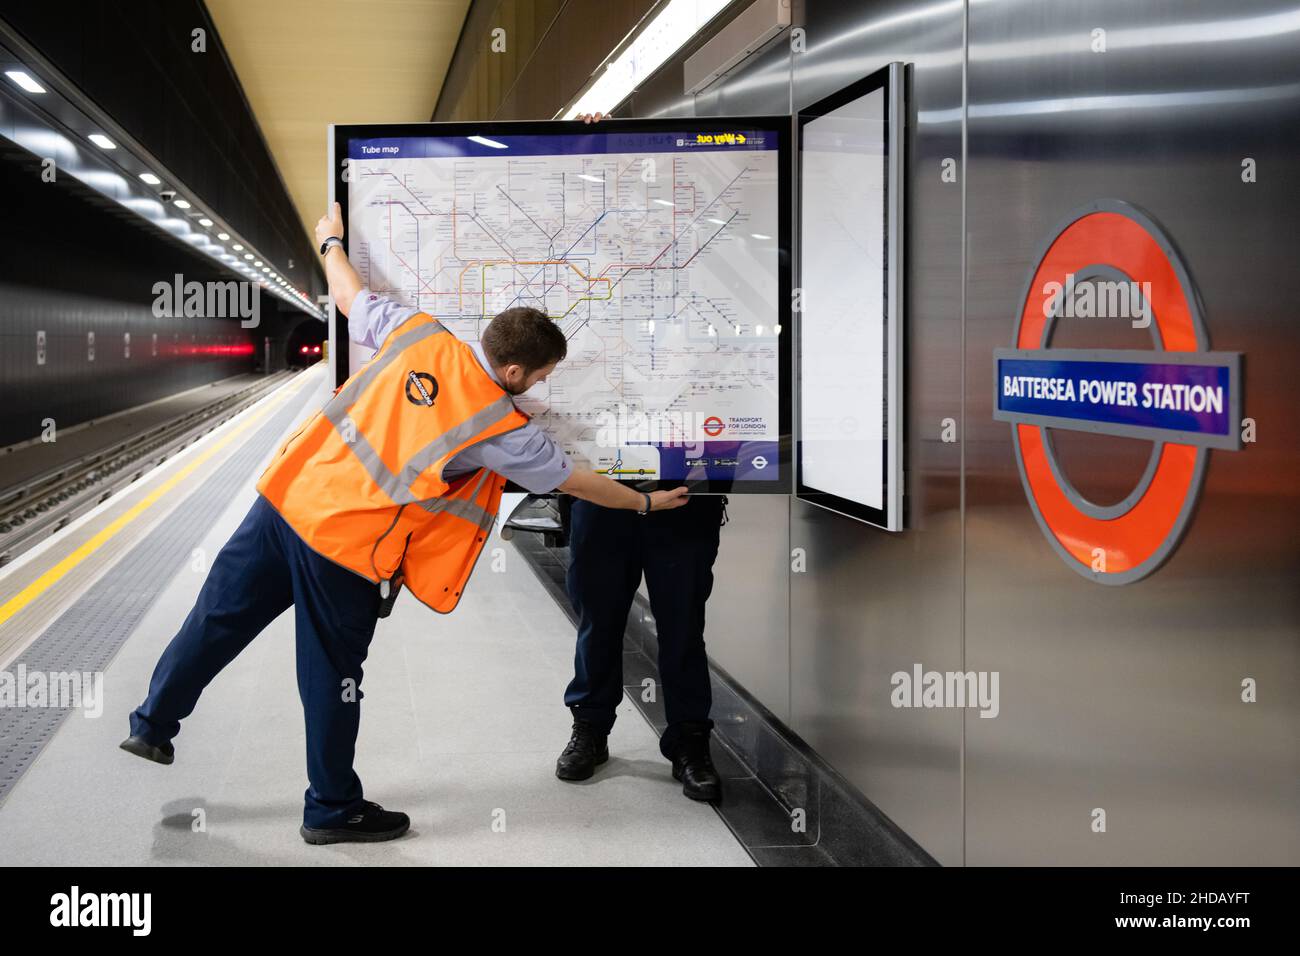 London Underground staff installing new rail and tube maps at Battersea Power Station, ahead of its opening on Monday 20th September 2021 Stock Photo